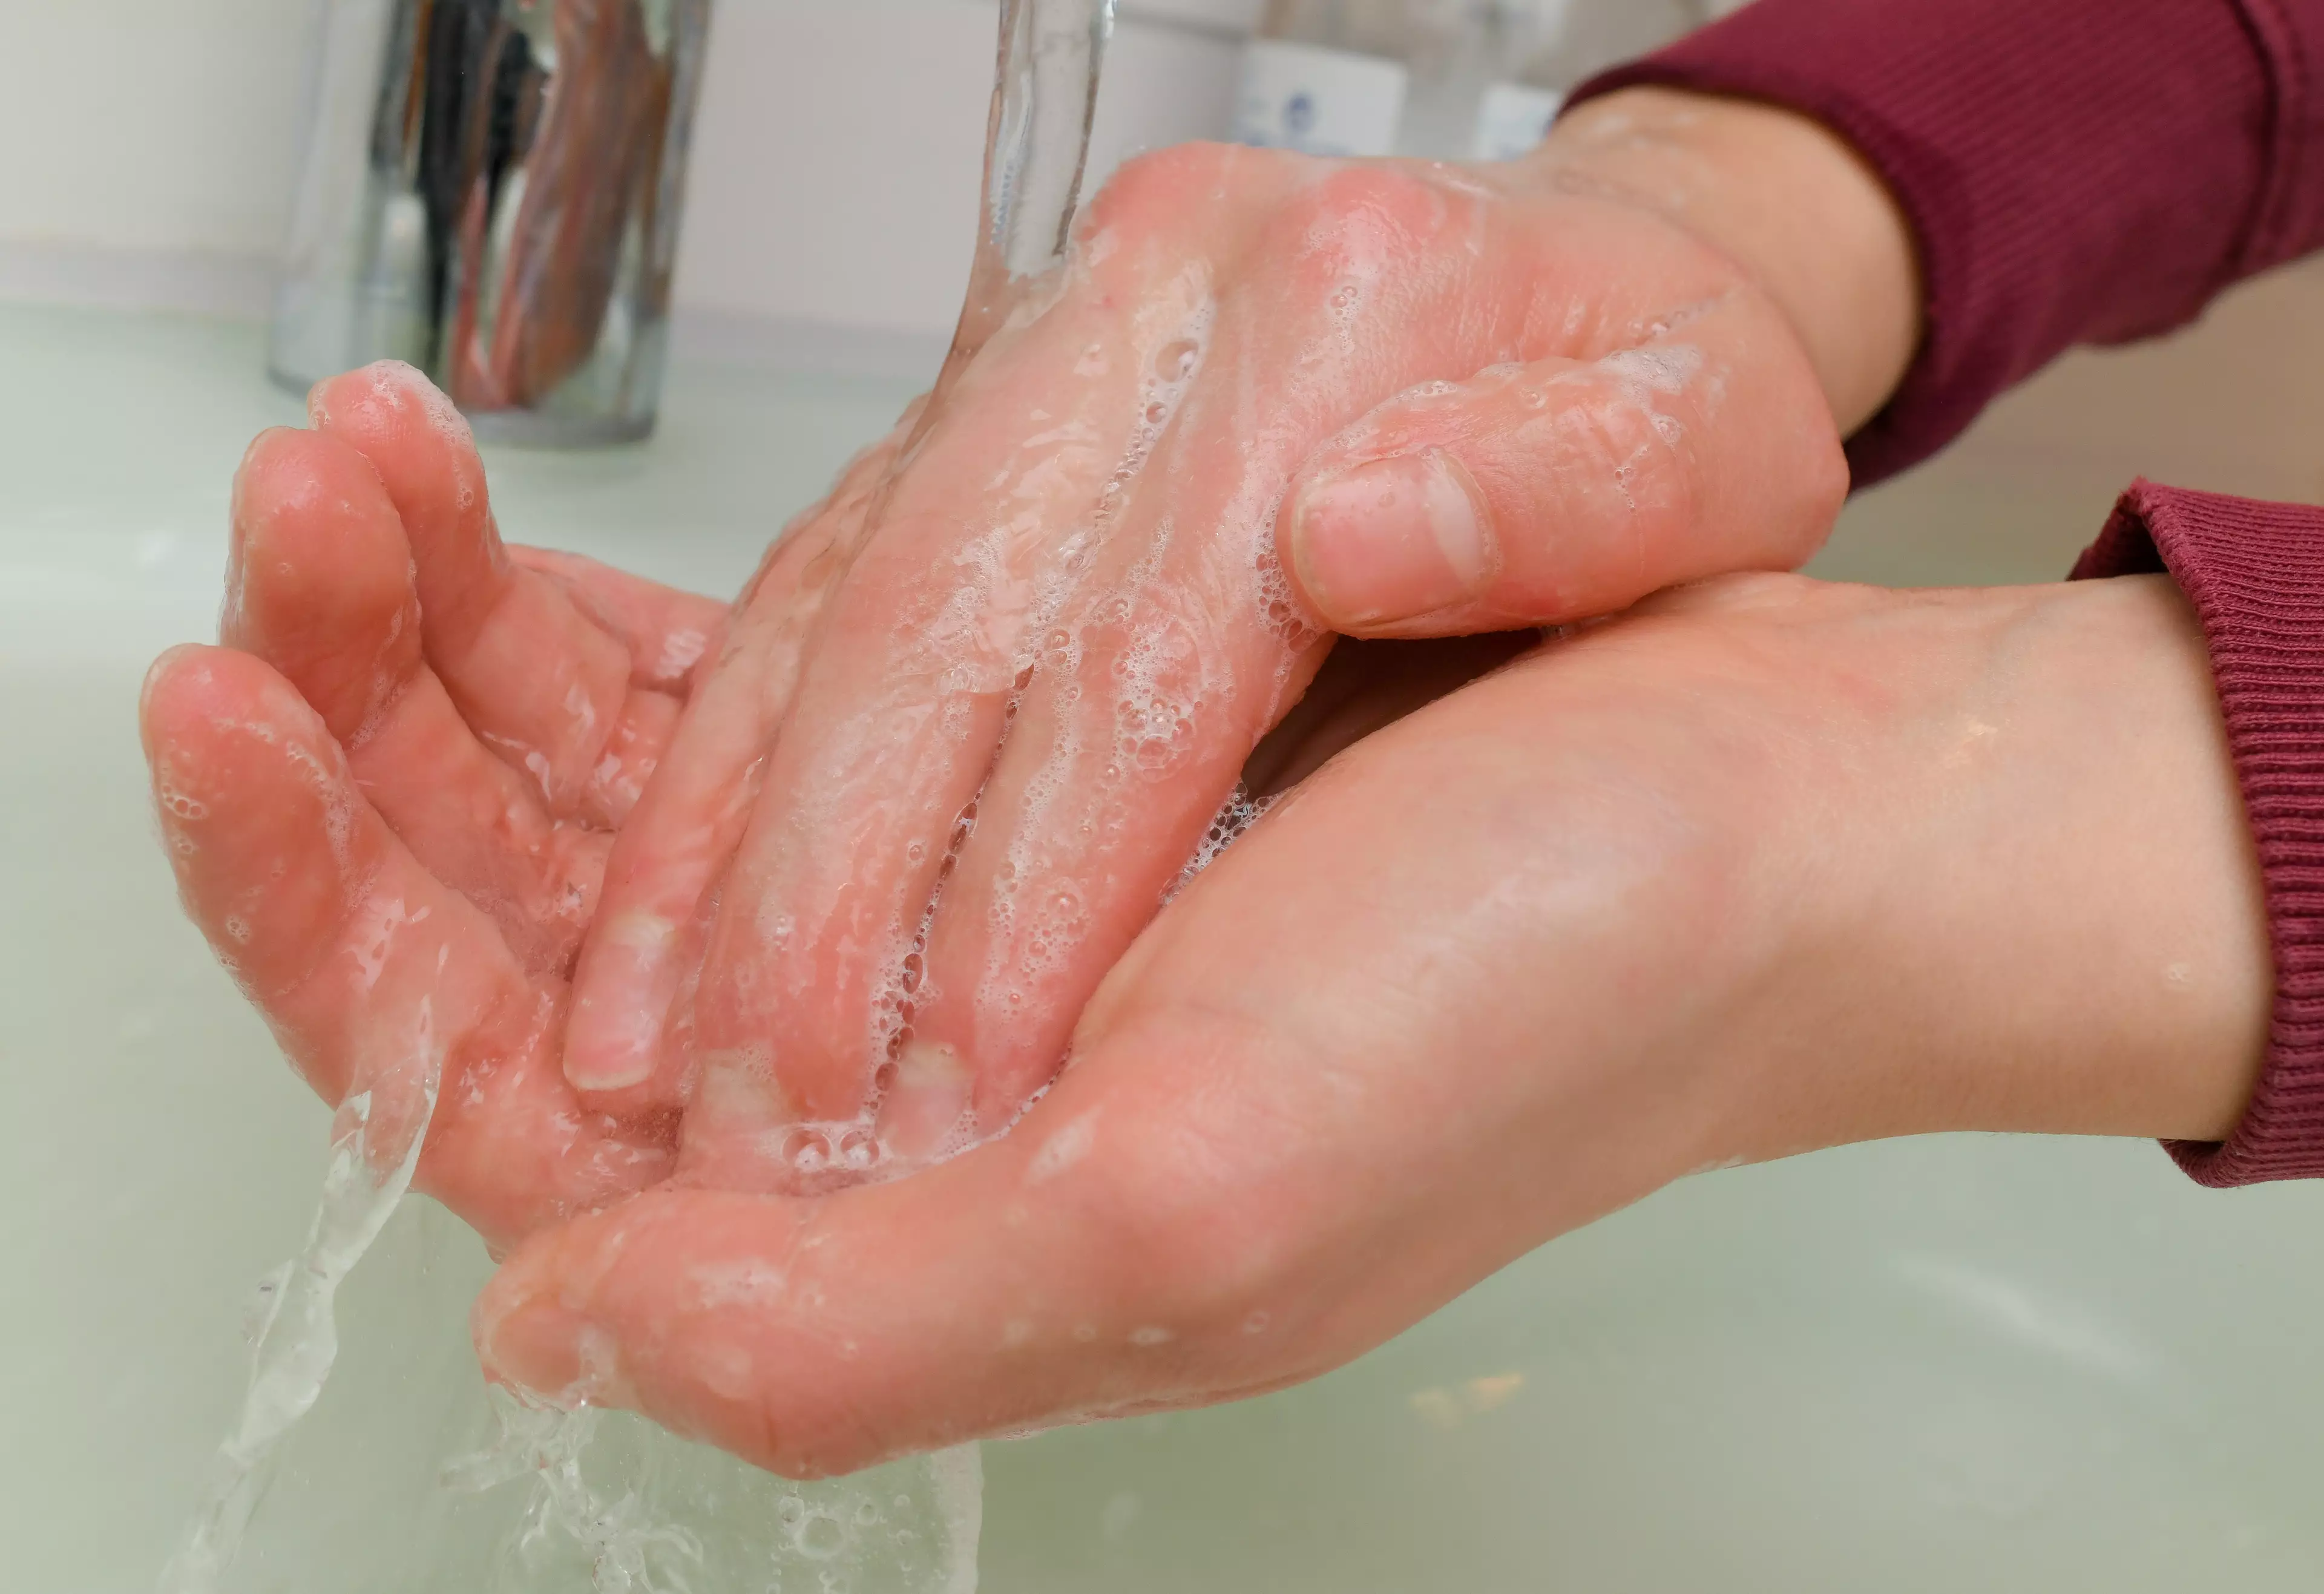 Good hand hygiene is one of the best ways to protect yourself from coronavirus.